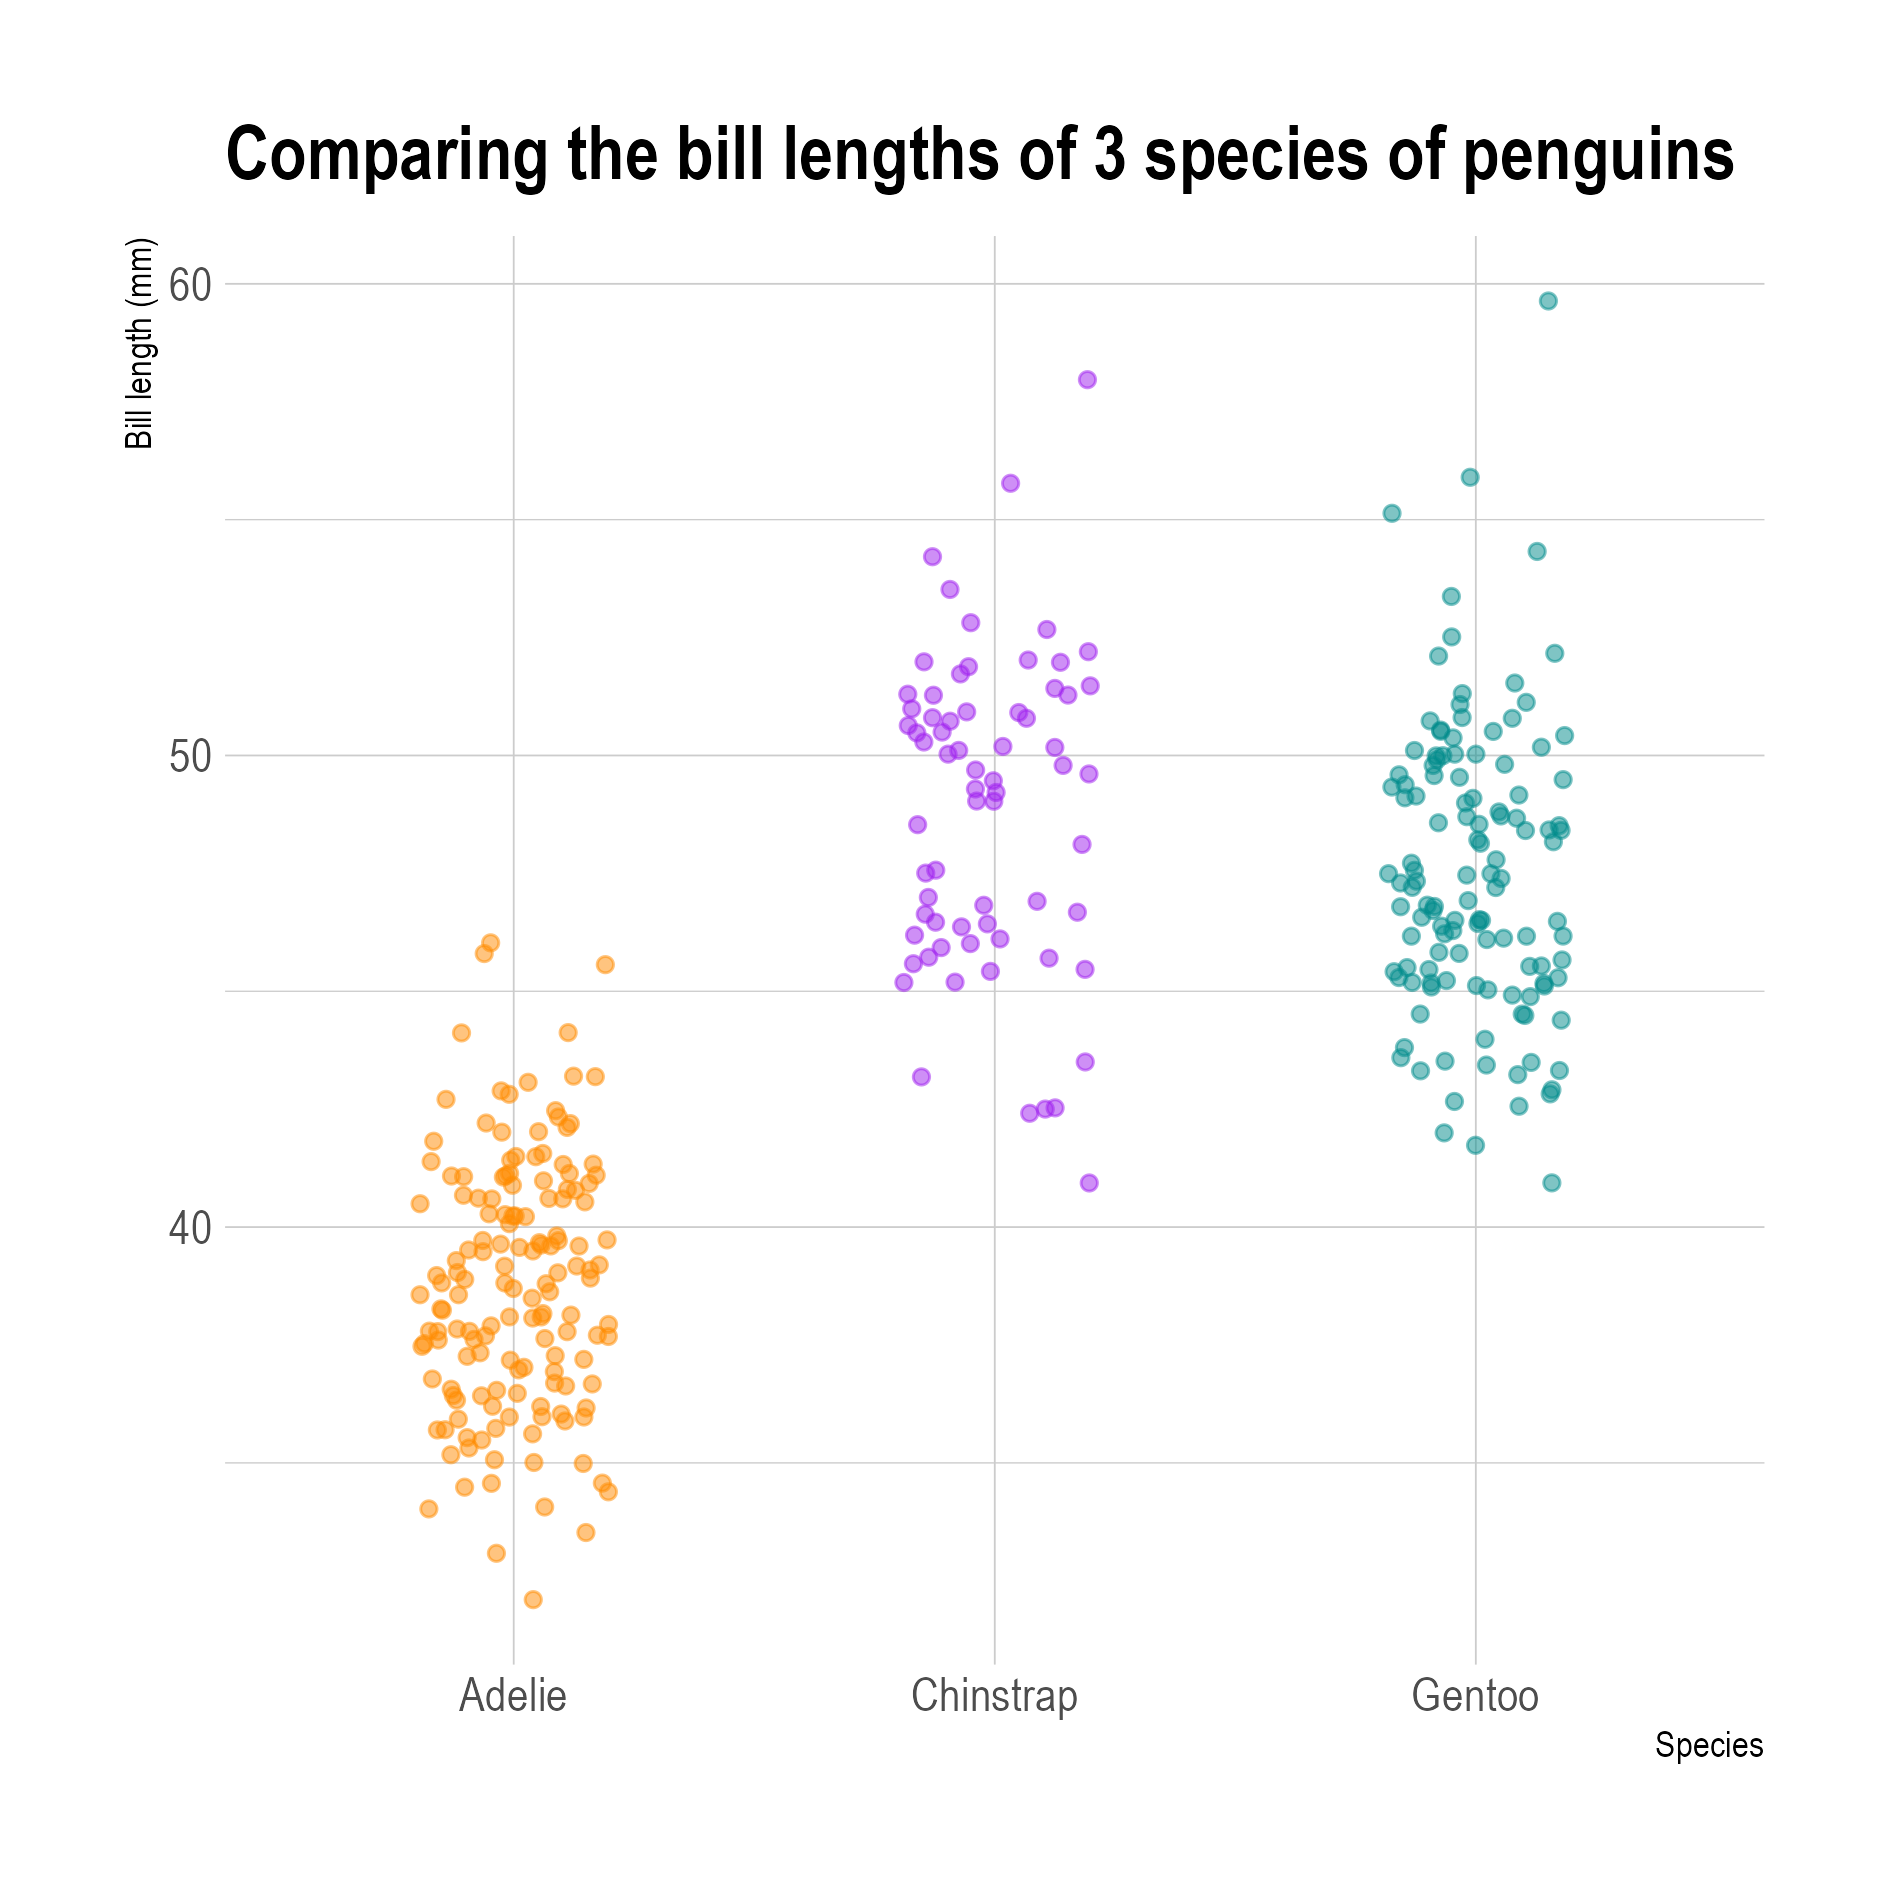 Jittered data points showing the distribution of bill lengths of 3 species of penguins